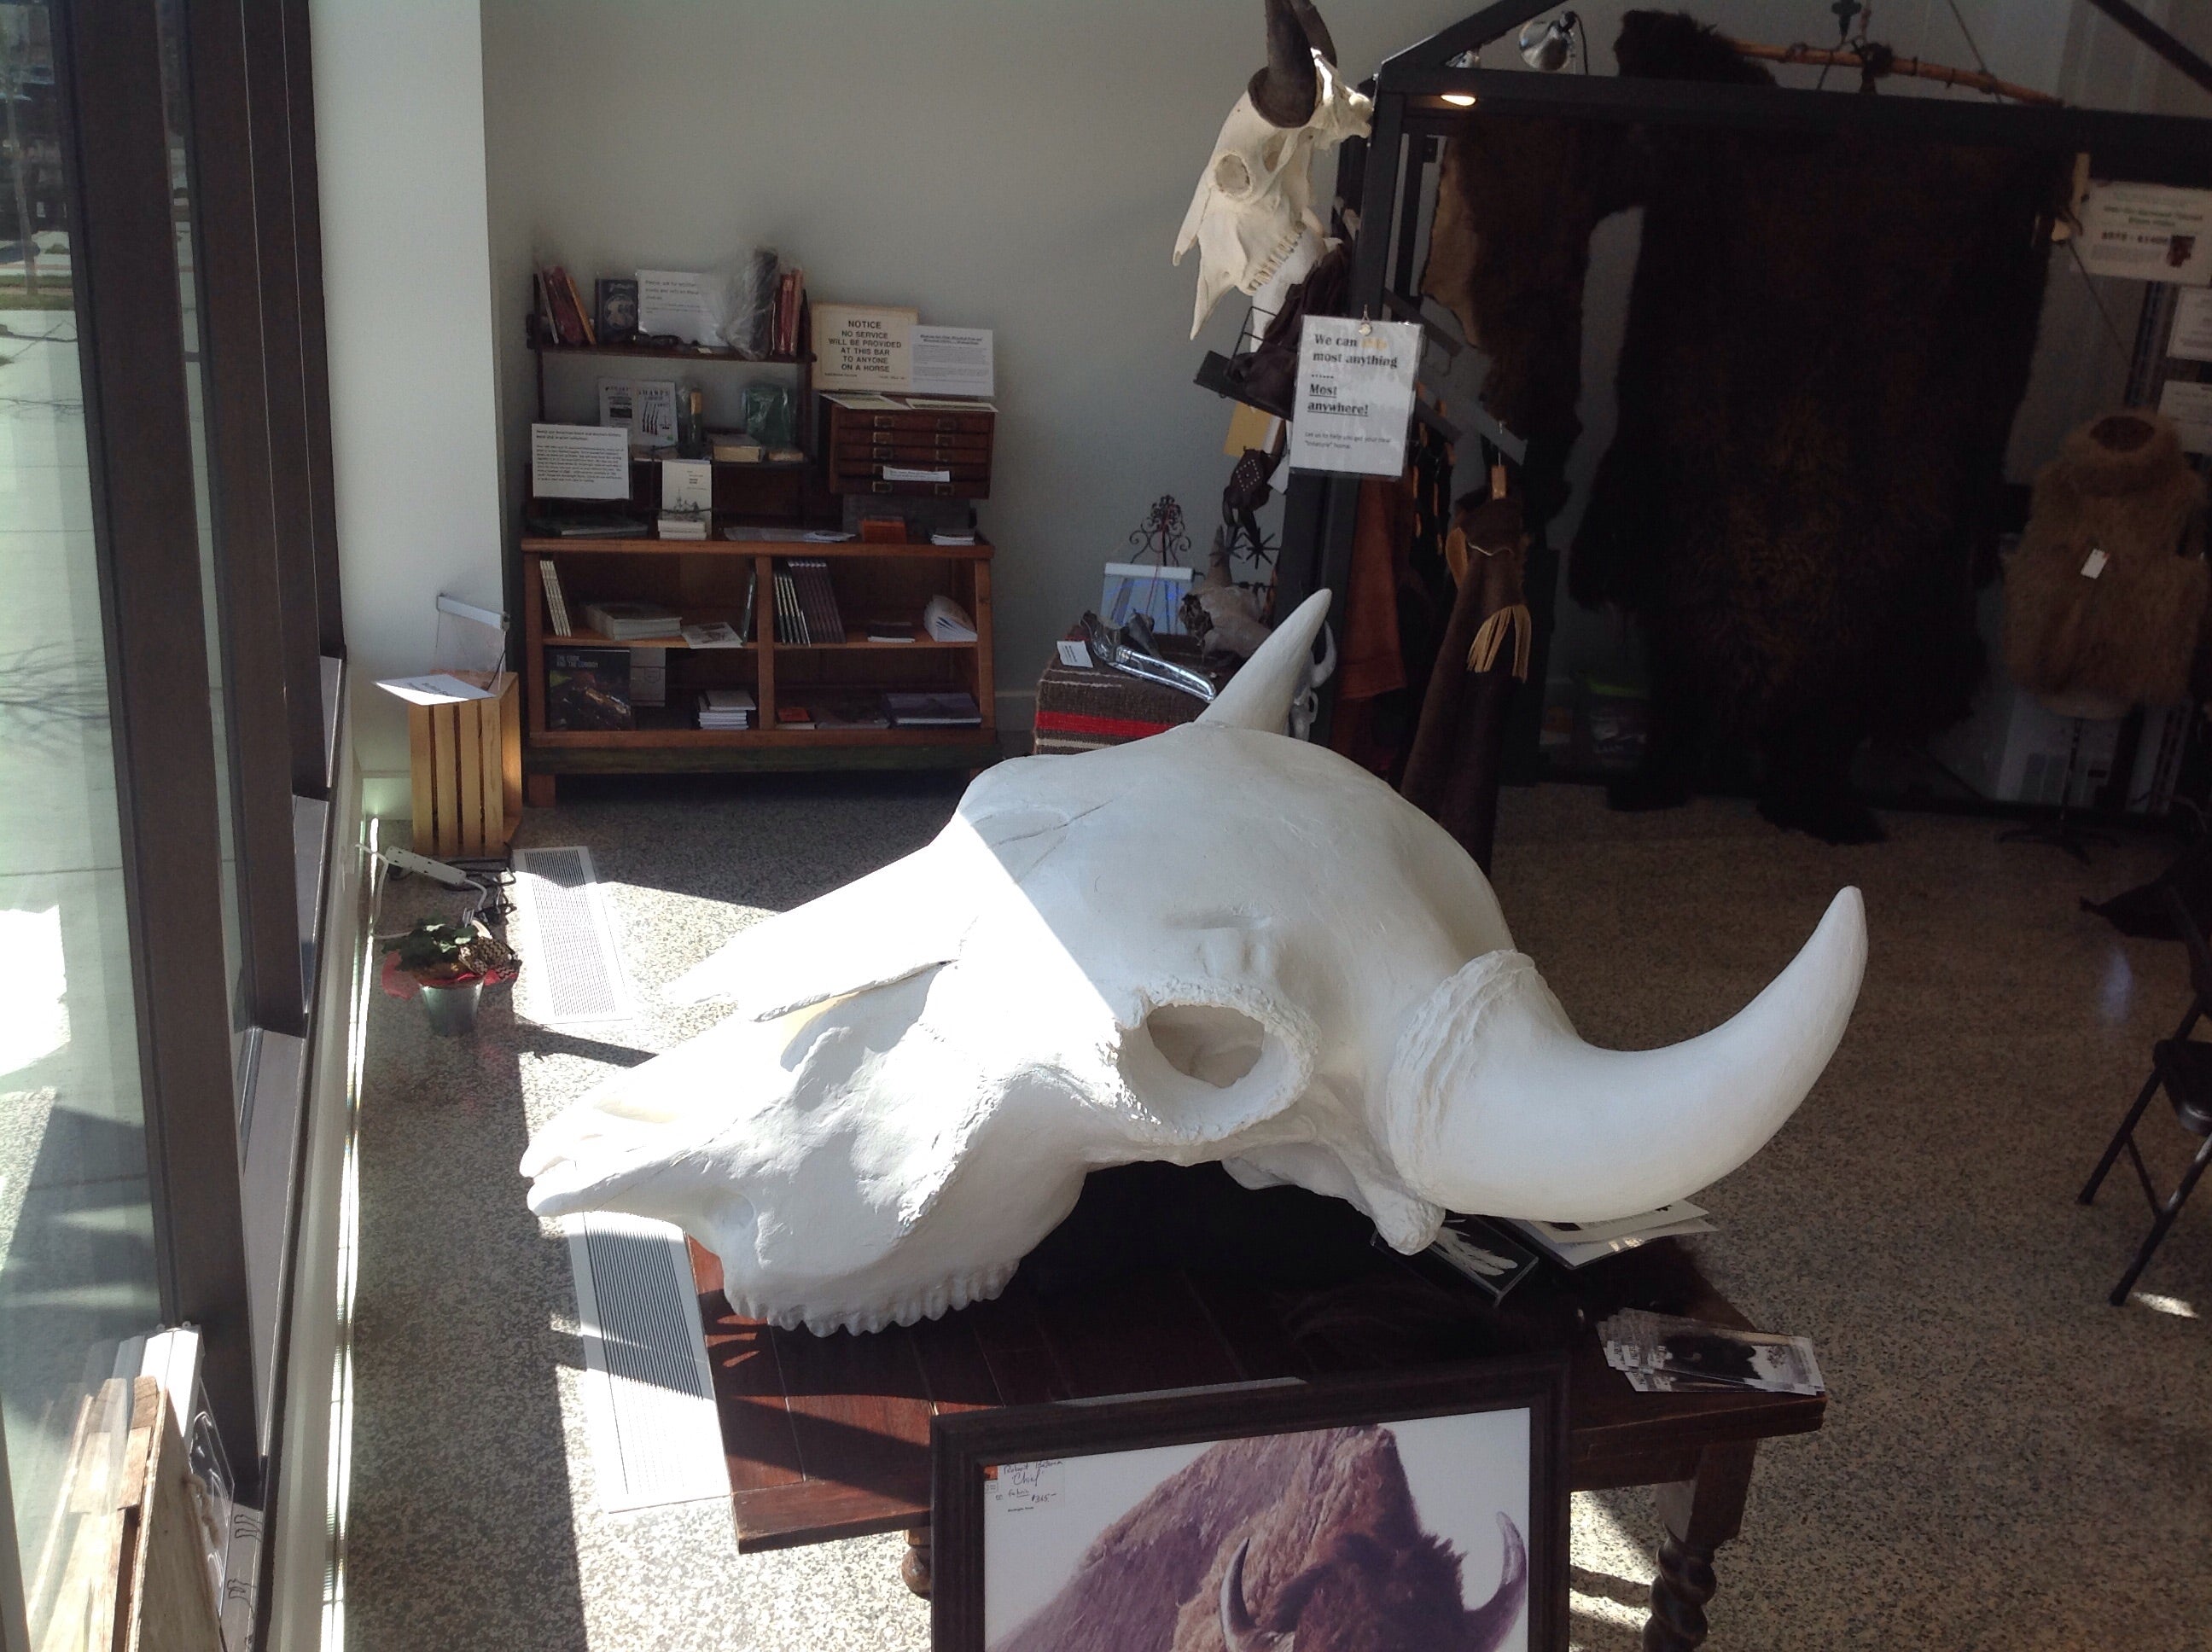 3 times lifesize bison bull skull - the Really Big Guy -